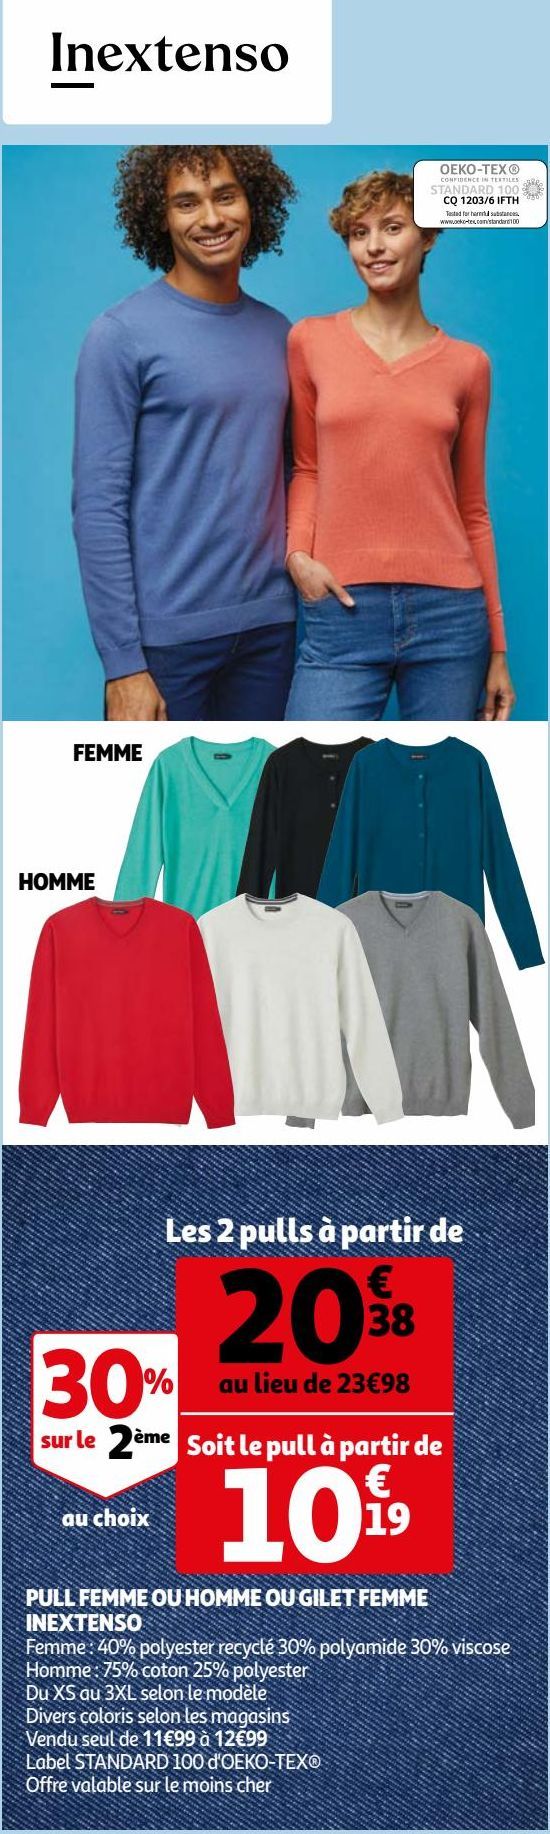 PULL FEMME OU HOMME OU GILET FEMME INEXTENSO